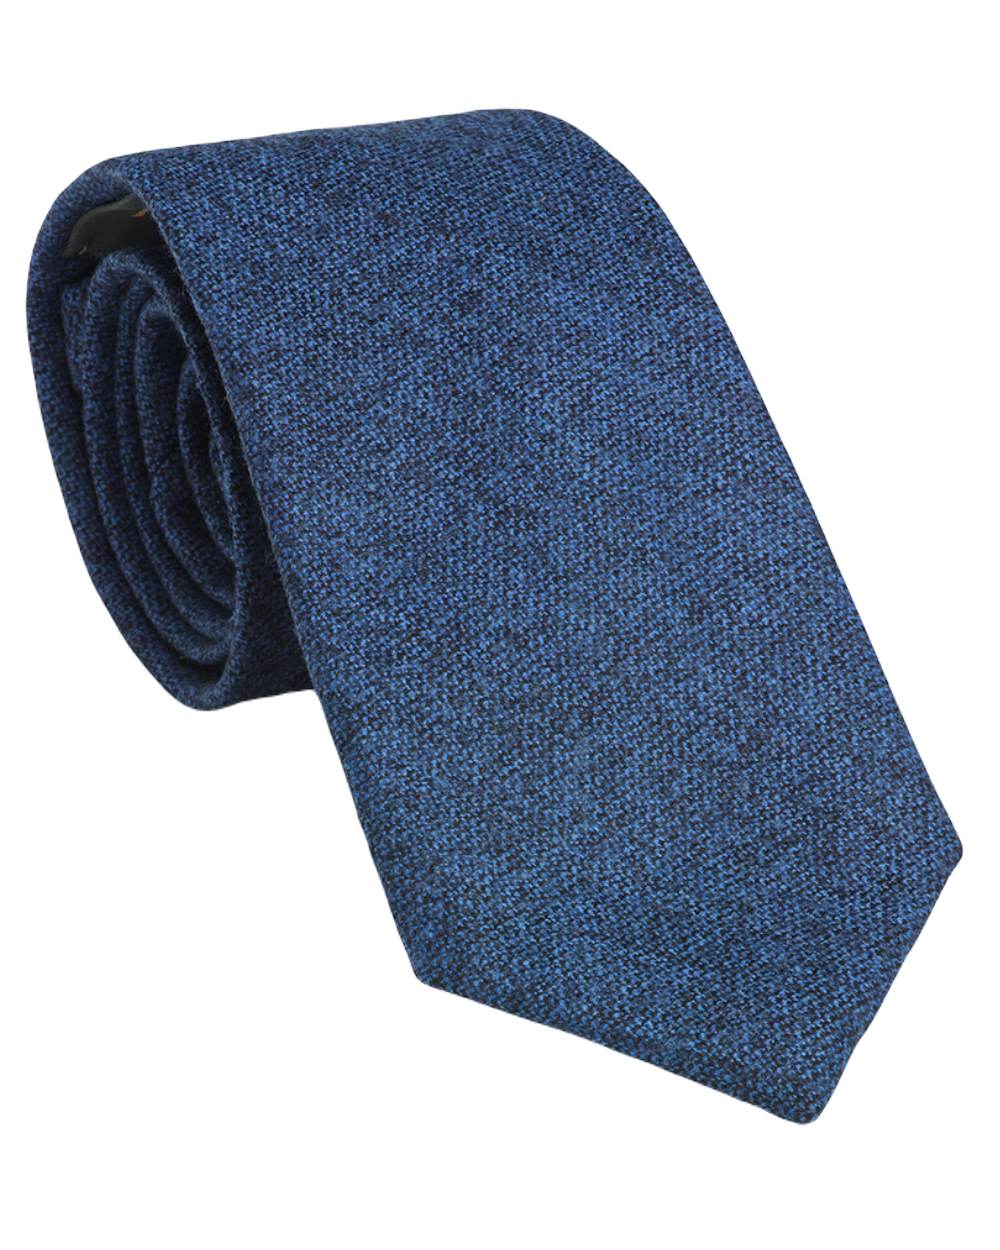 Midnight Coloured Laksen Celtic Tweed Tie On A White Background 